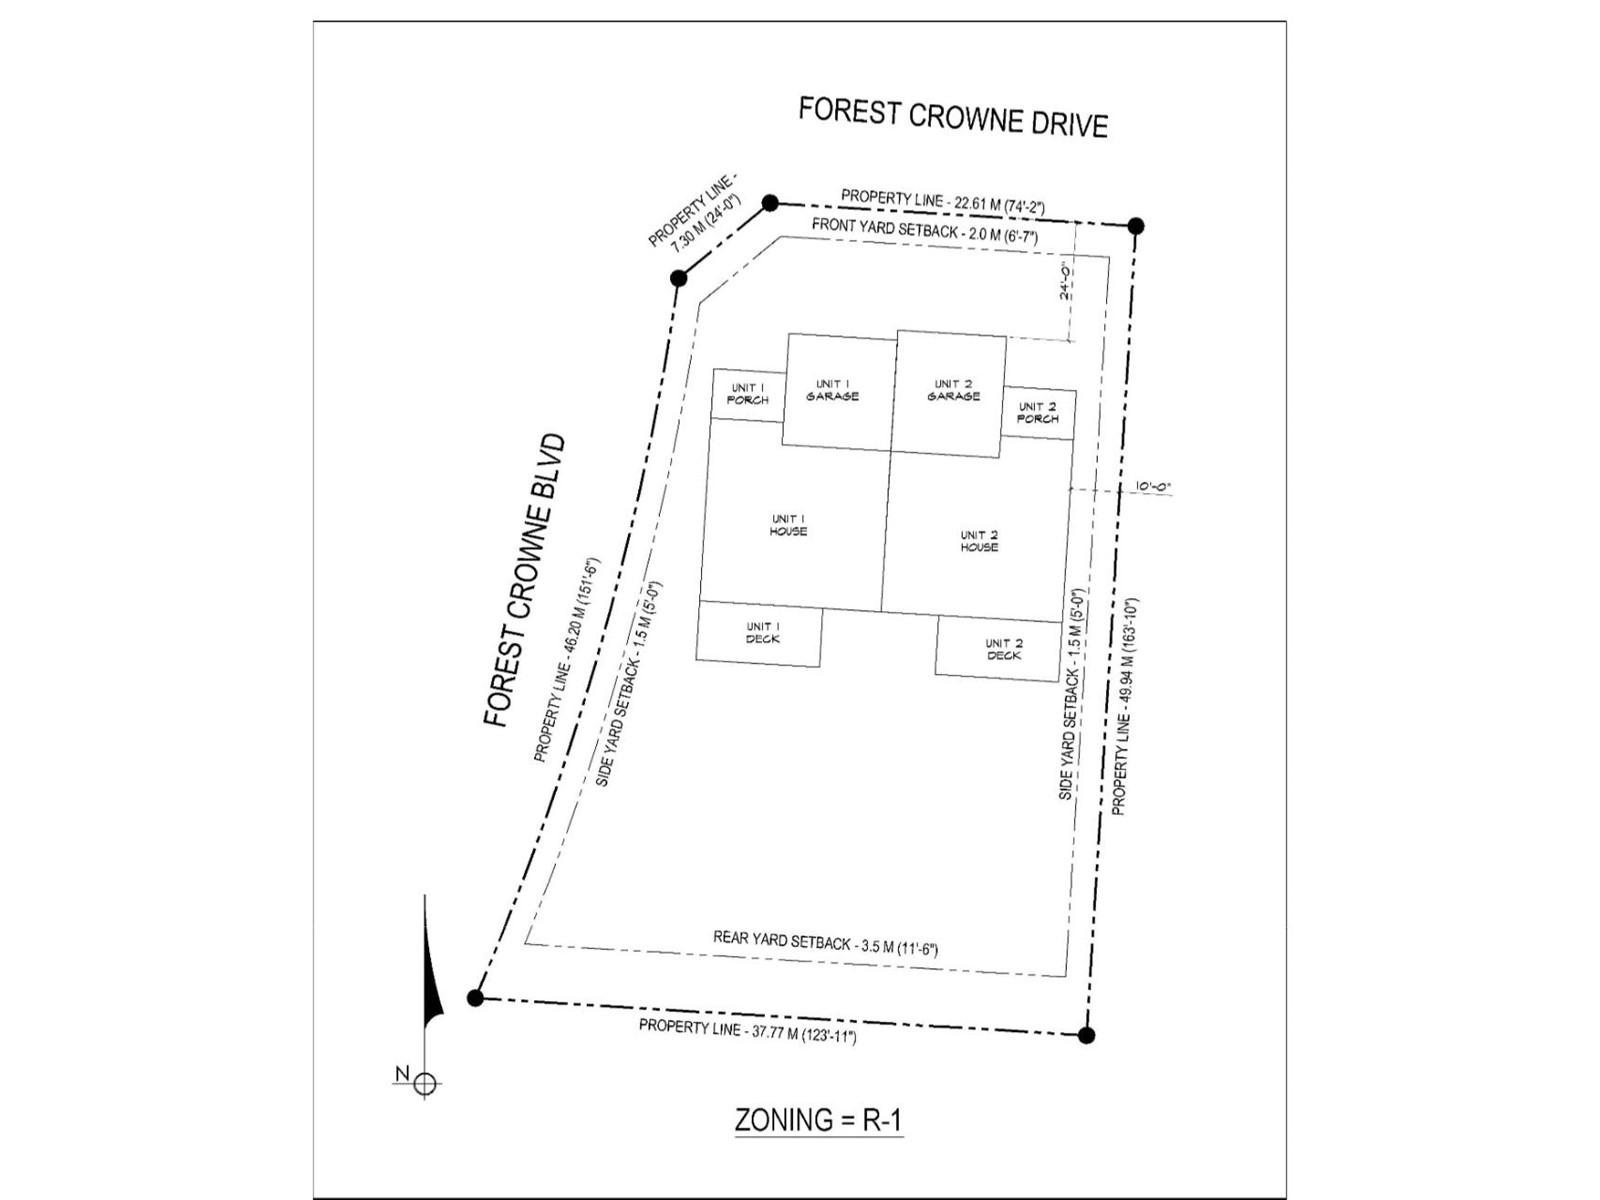 












Proposed 2 - 501 FOREST CROWNE DRIVE

,
Kimberley,




British Columbia
V1A0A4

